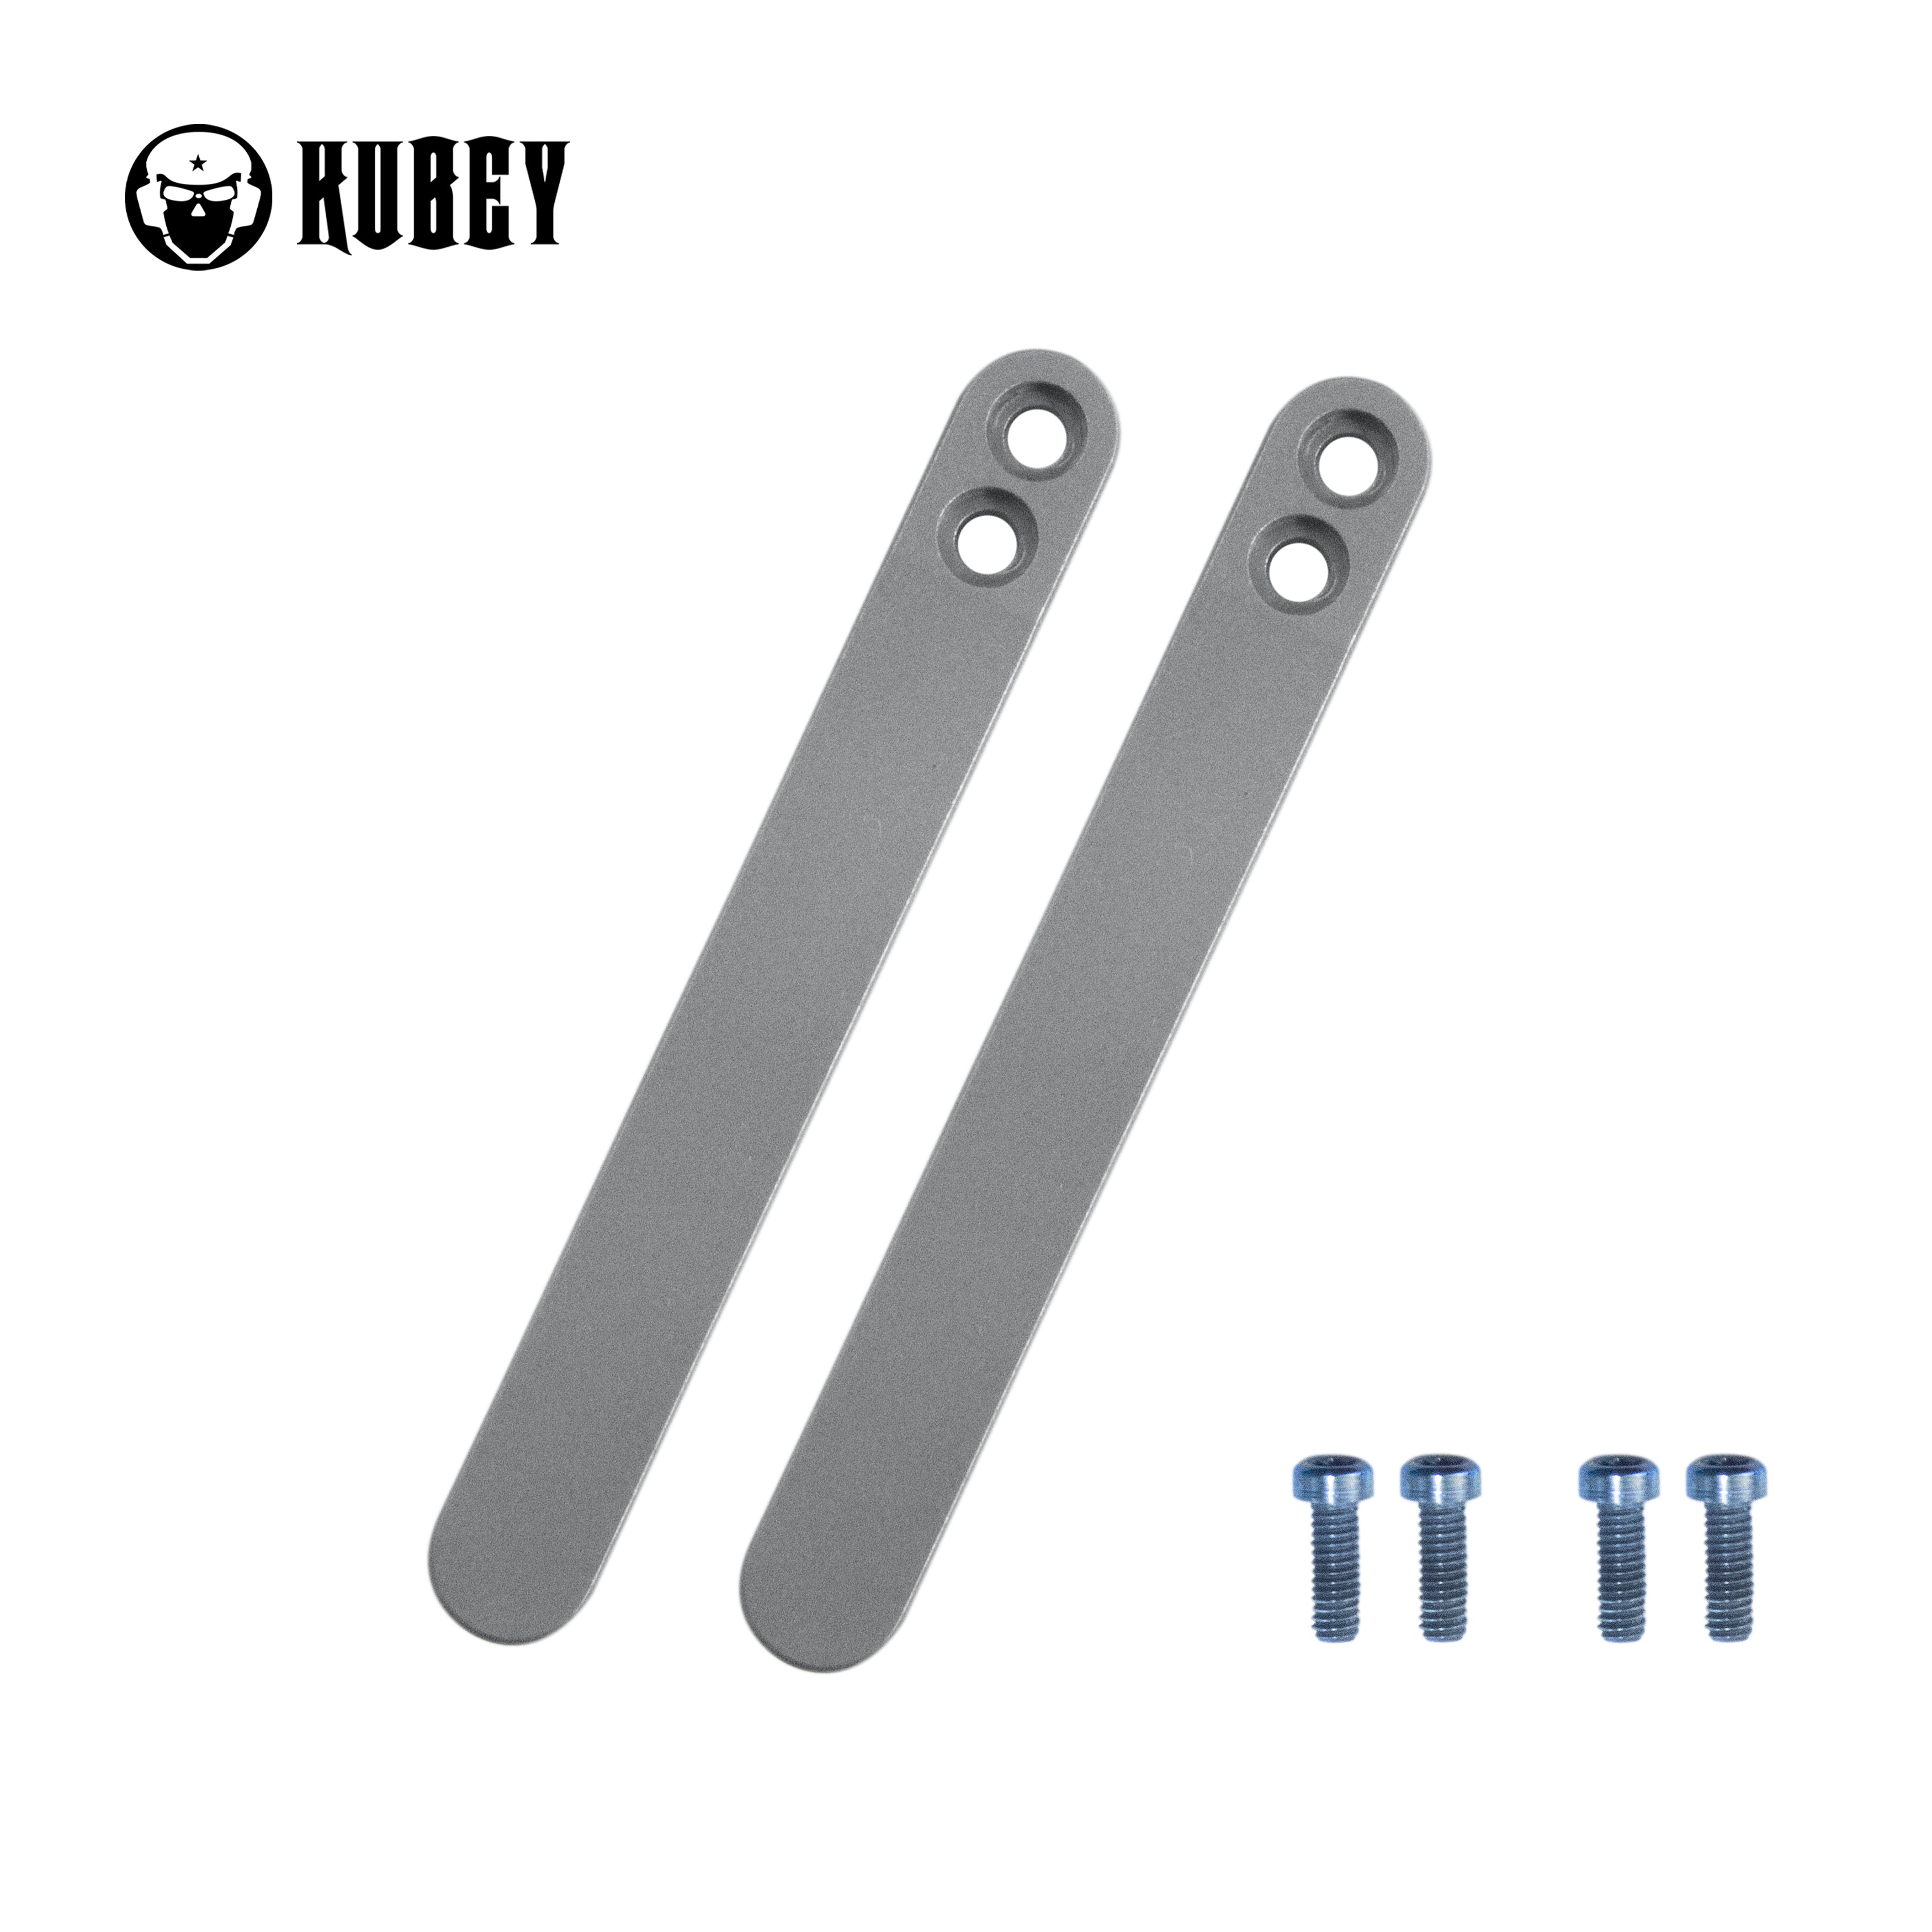 Kubey Titanium Clip for Folding Knives, 2 Pieces with 4 Screws, Grey/Grey, KH034